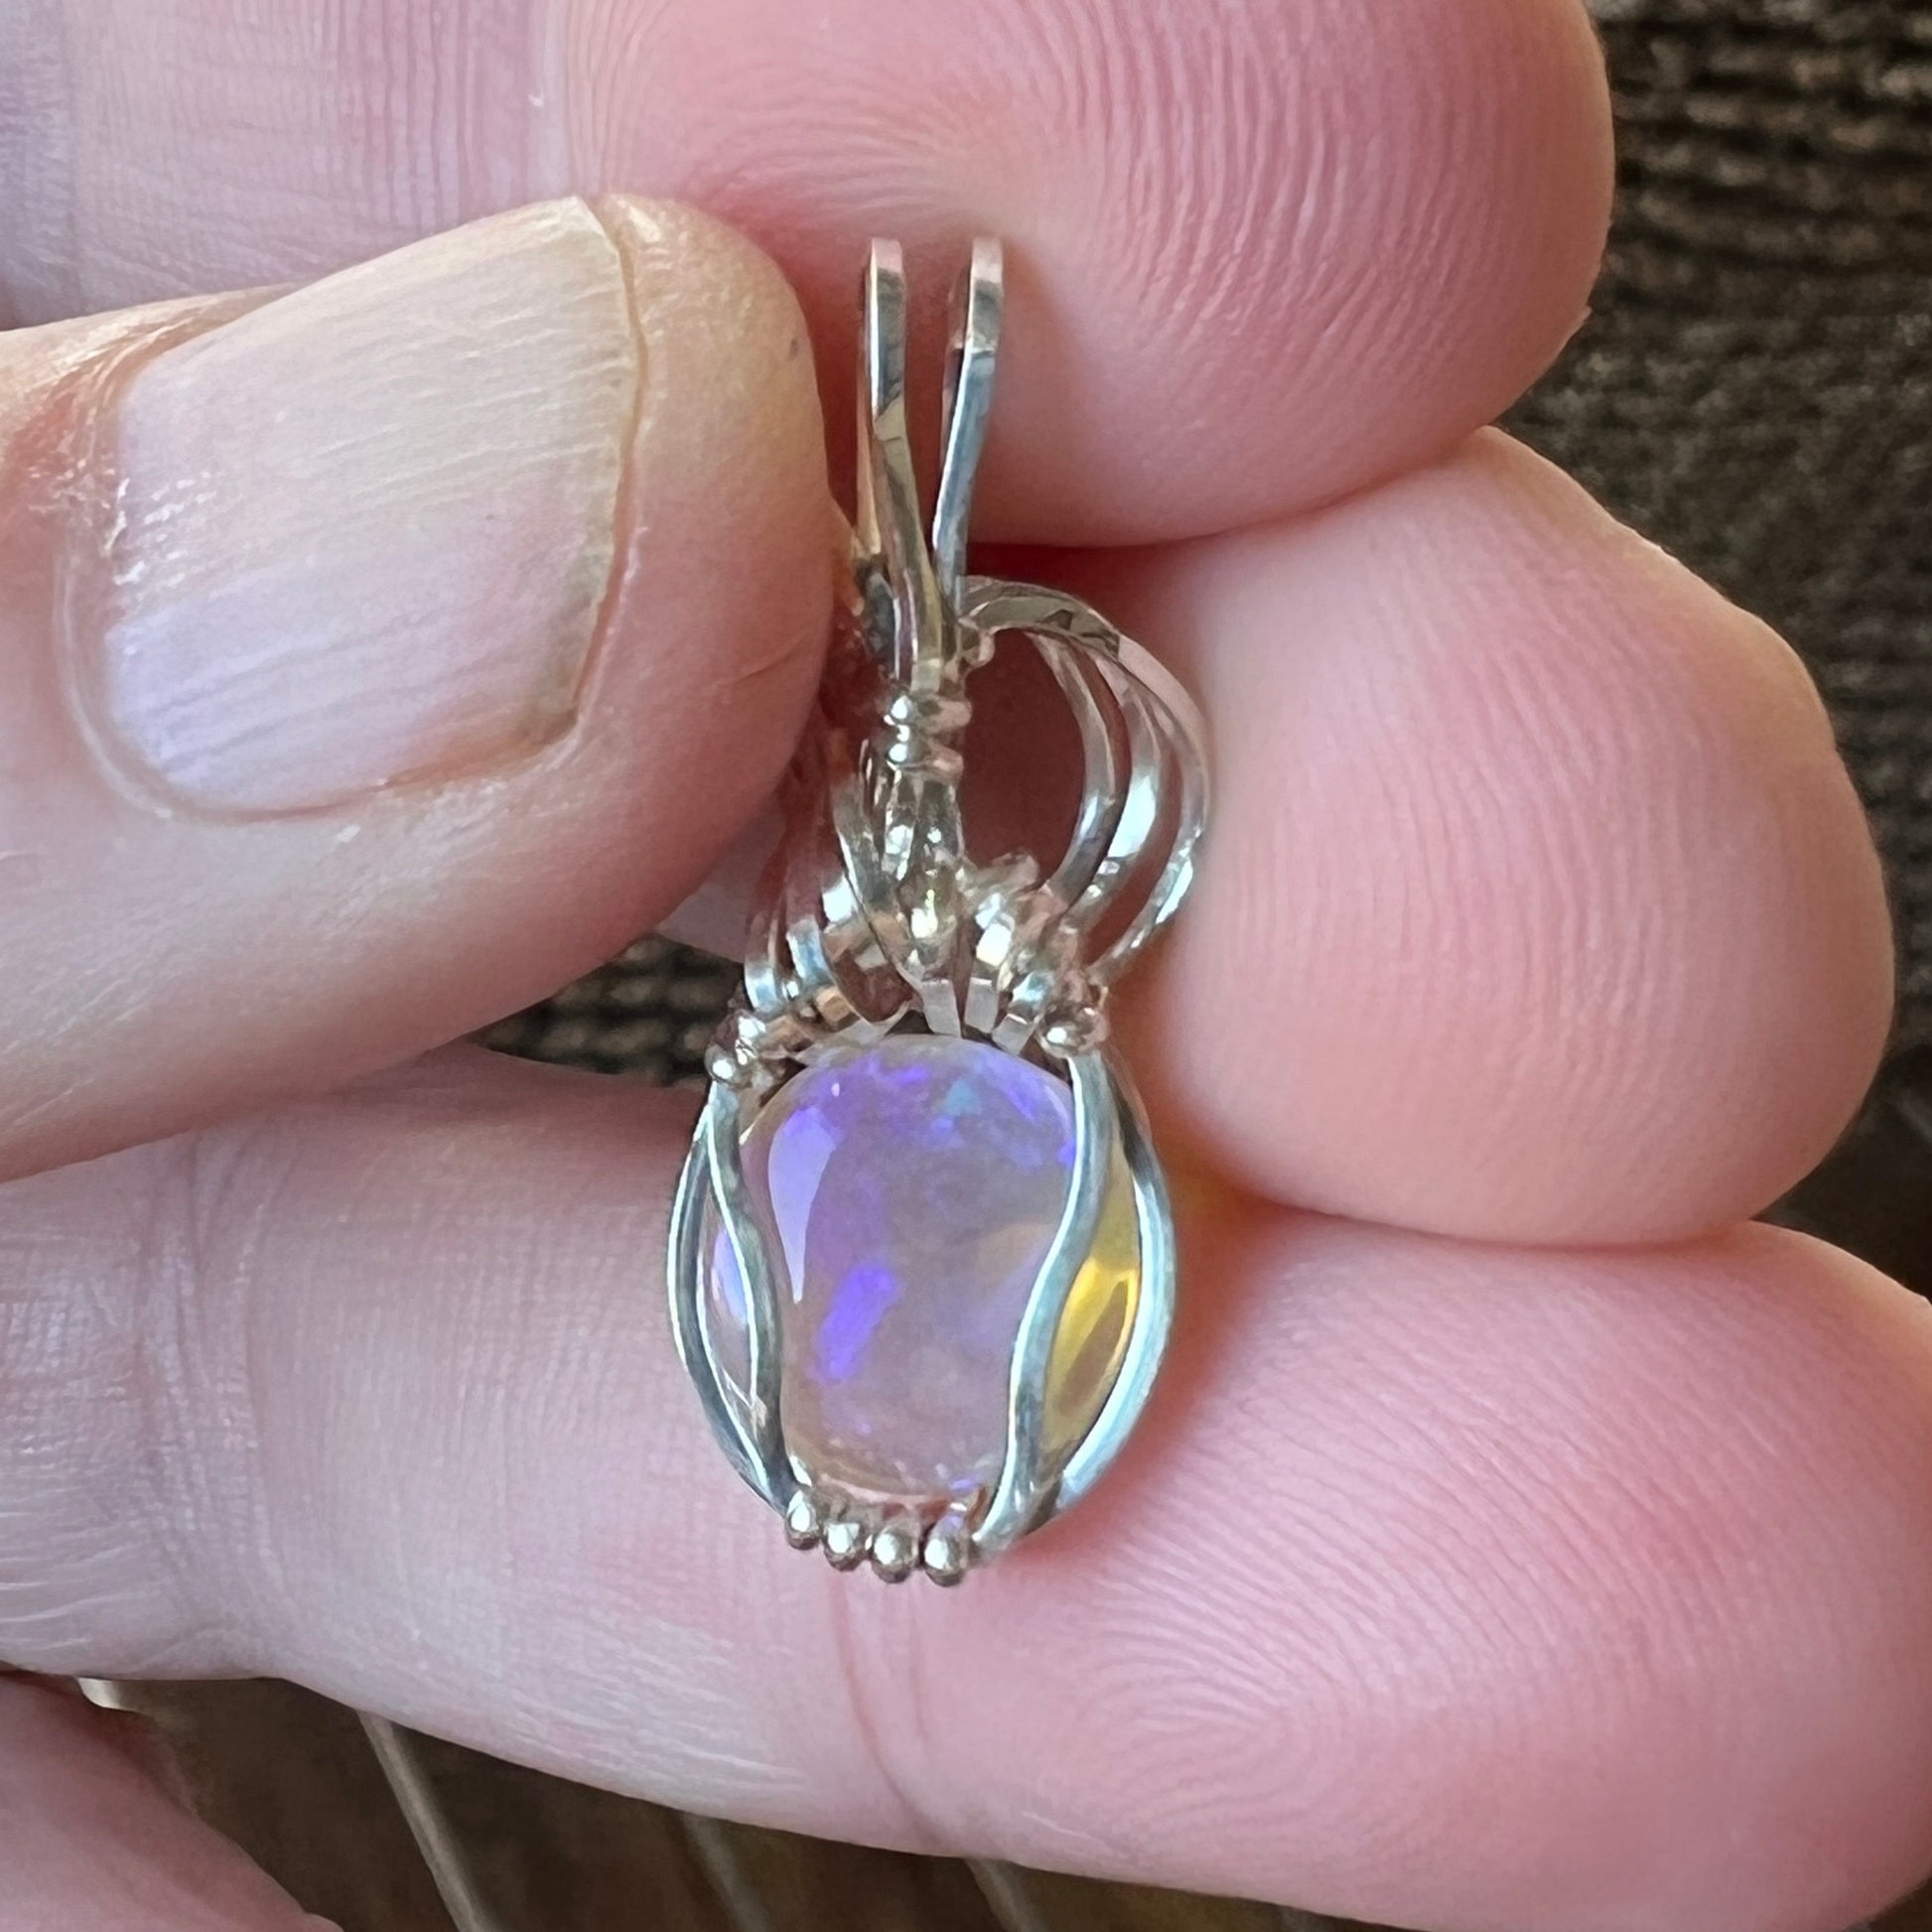 Beautifully cut Lightning Ridge Jelly Crystal opal. Cut and polished by Bill Johnson. Expertly set in a unique silver wire wrap. An awesome hand made gift. 